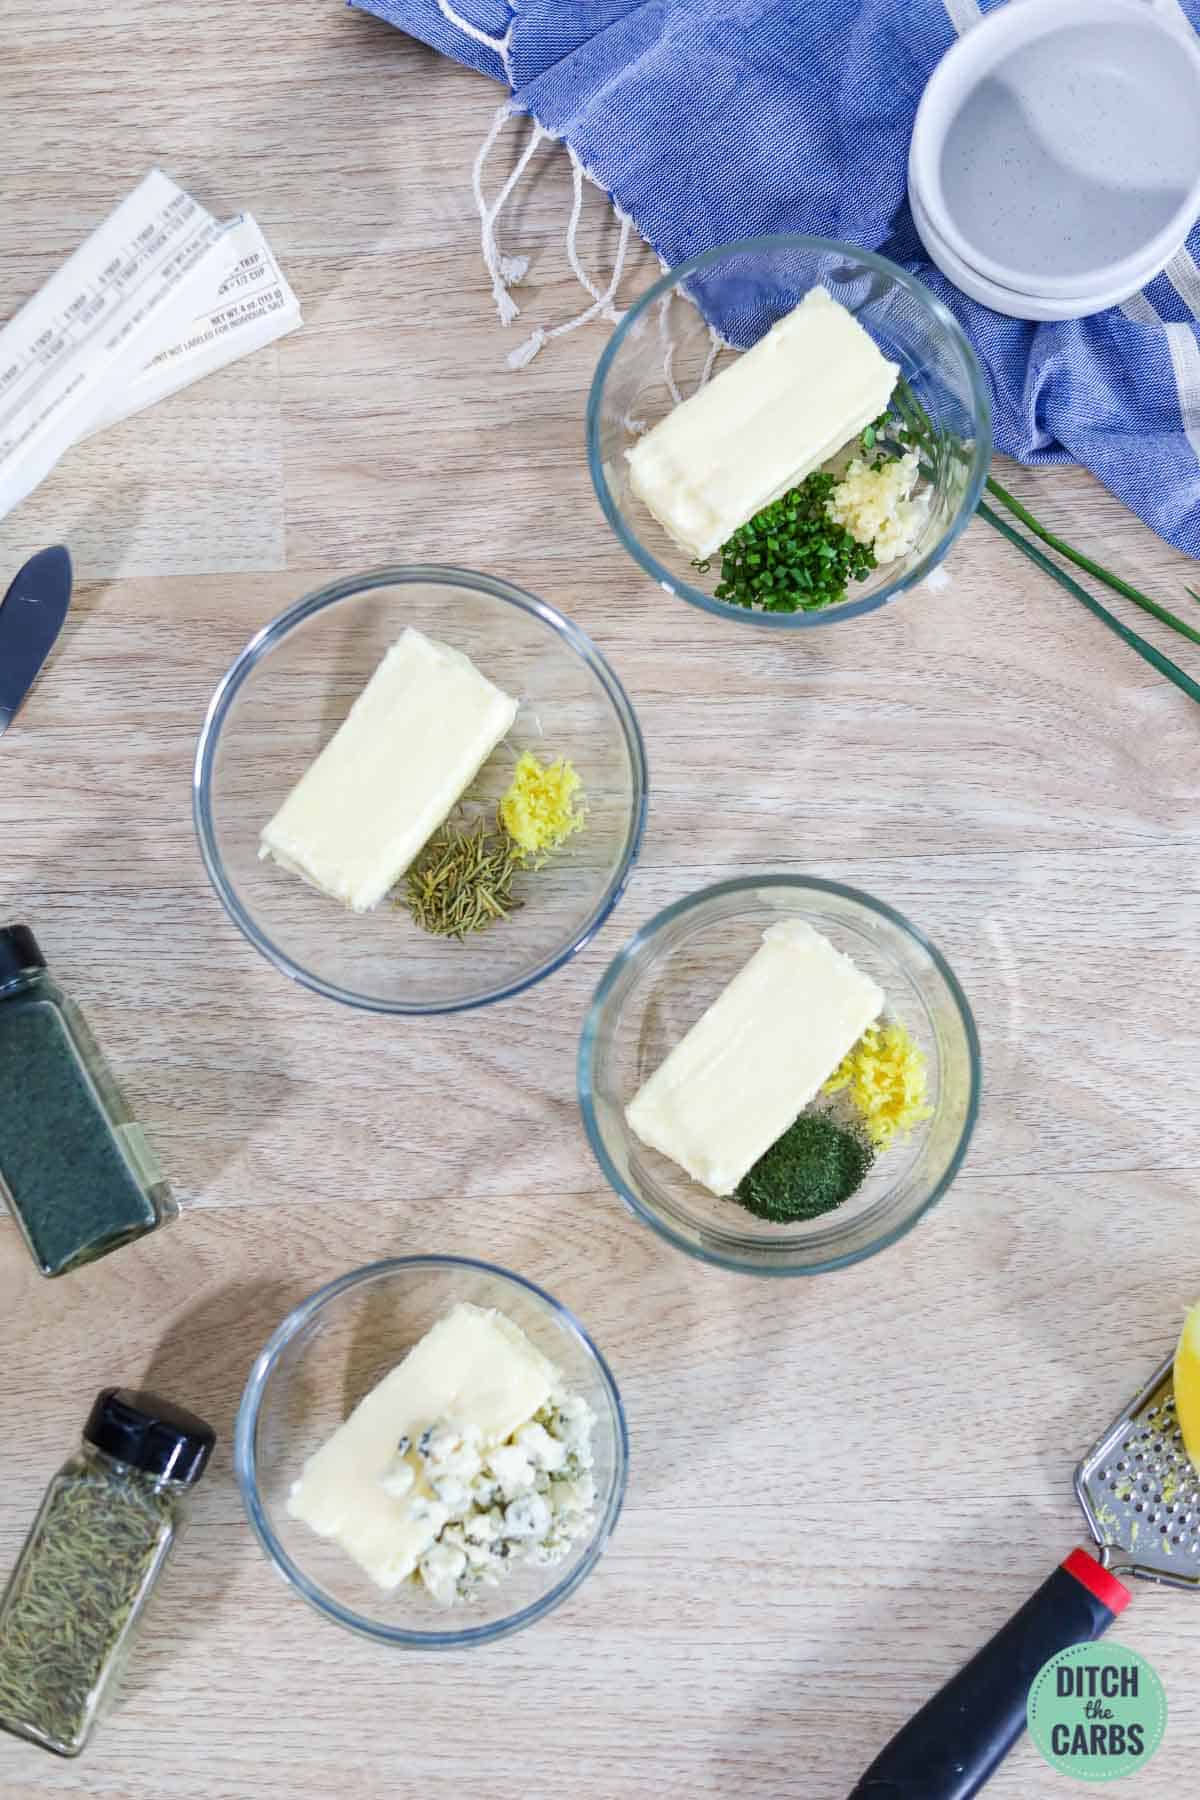 four pots of homemade herbed butter